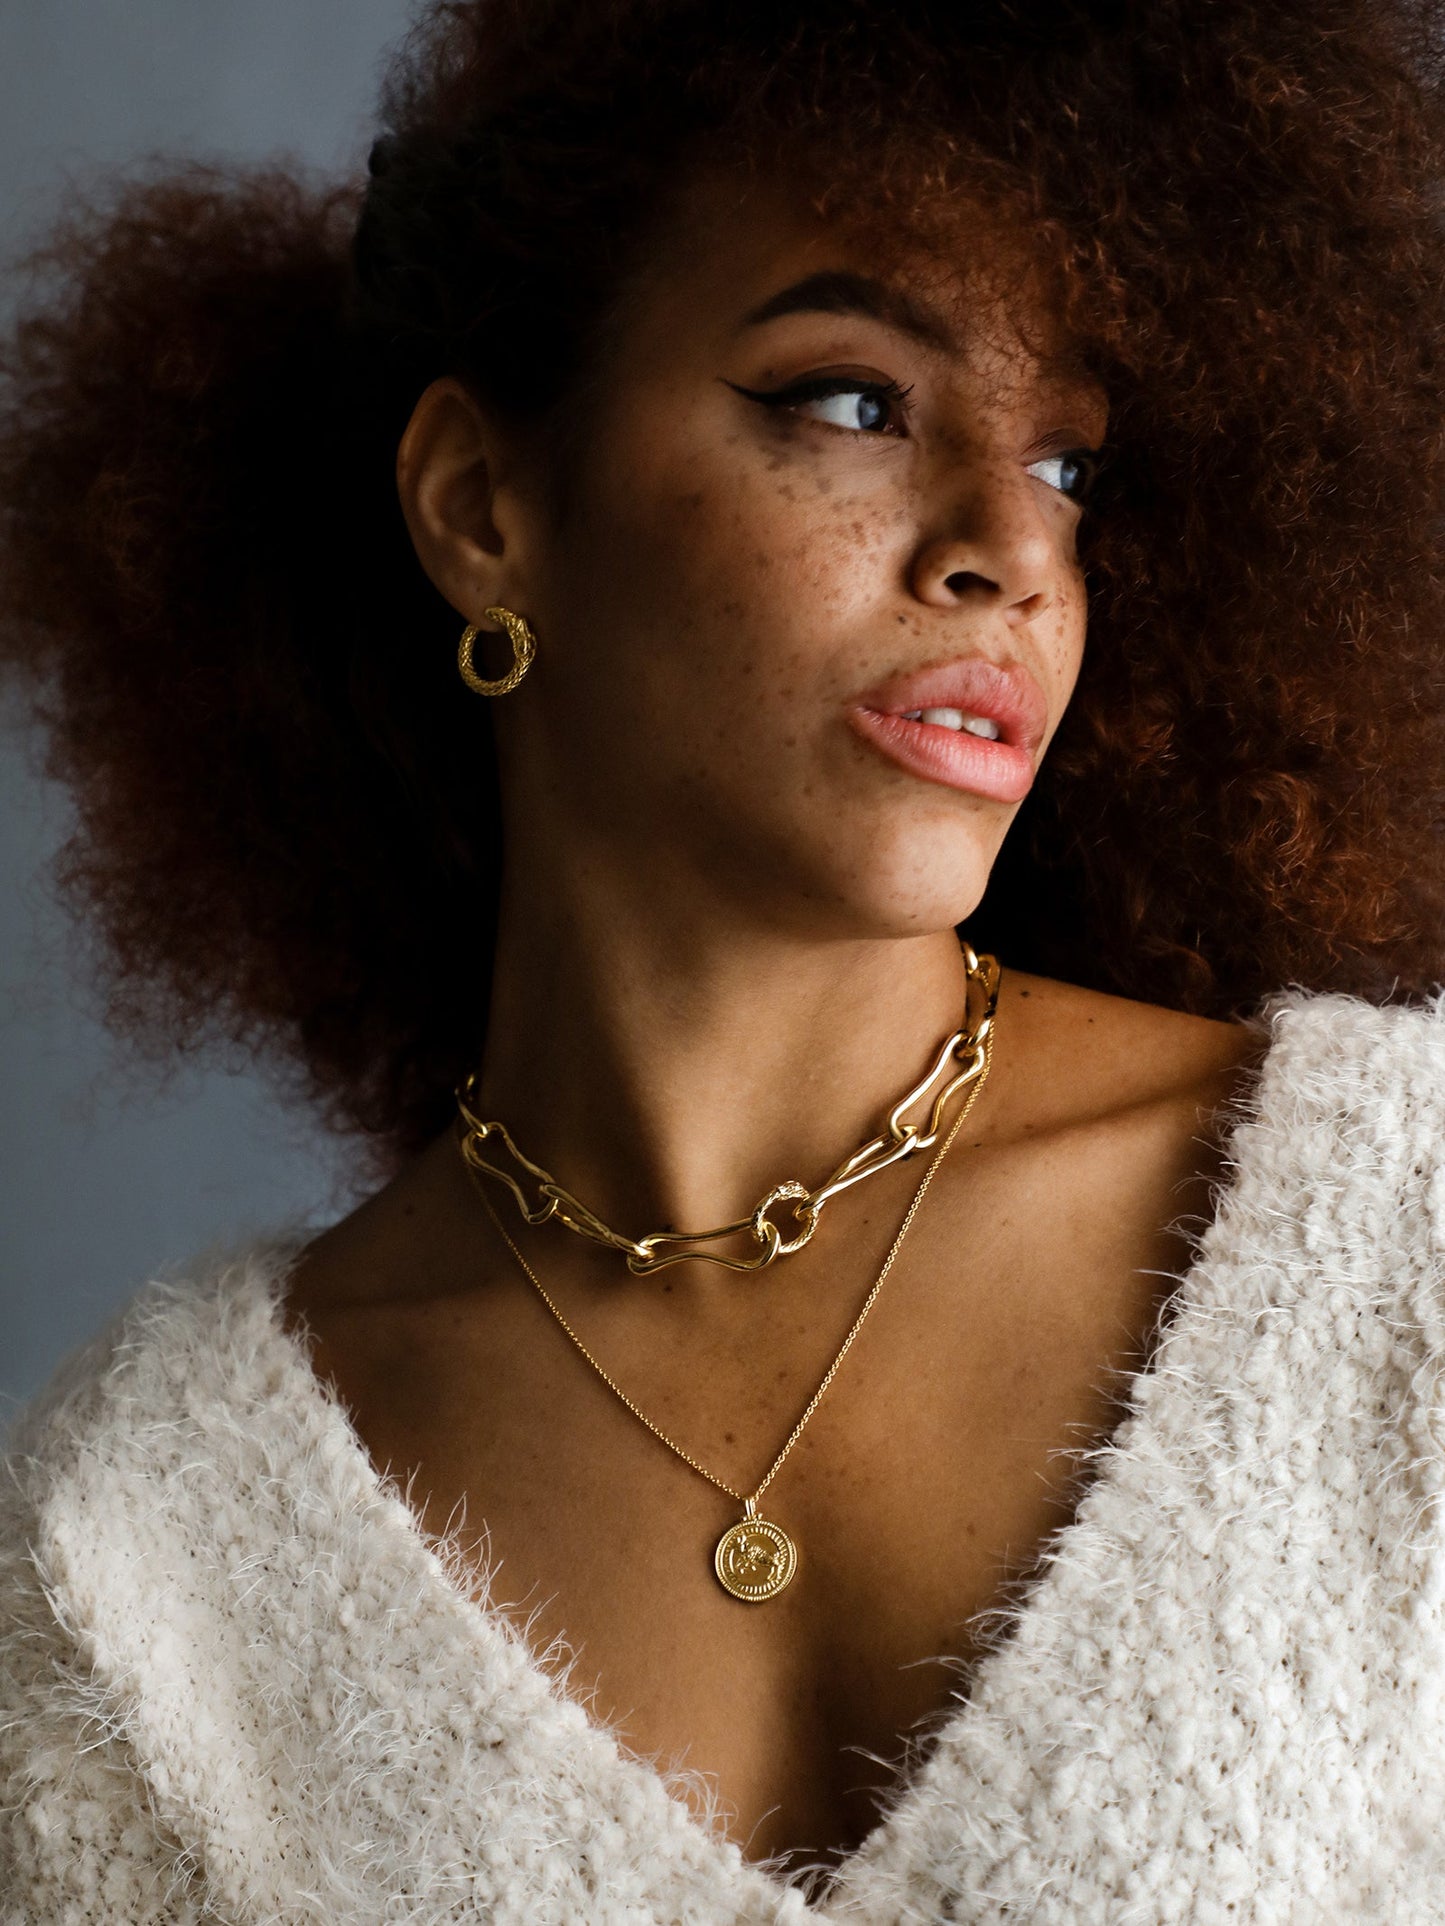 Ouroboros Chunky Choker, Earrings and Sagittarius Necklace.Gold plated